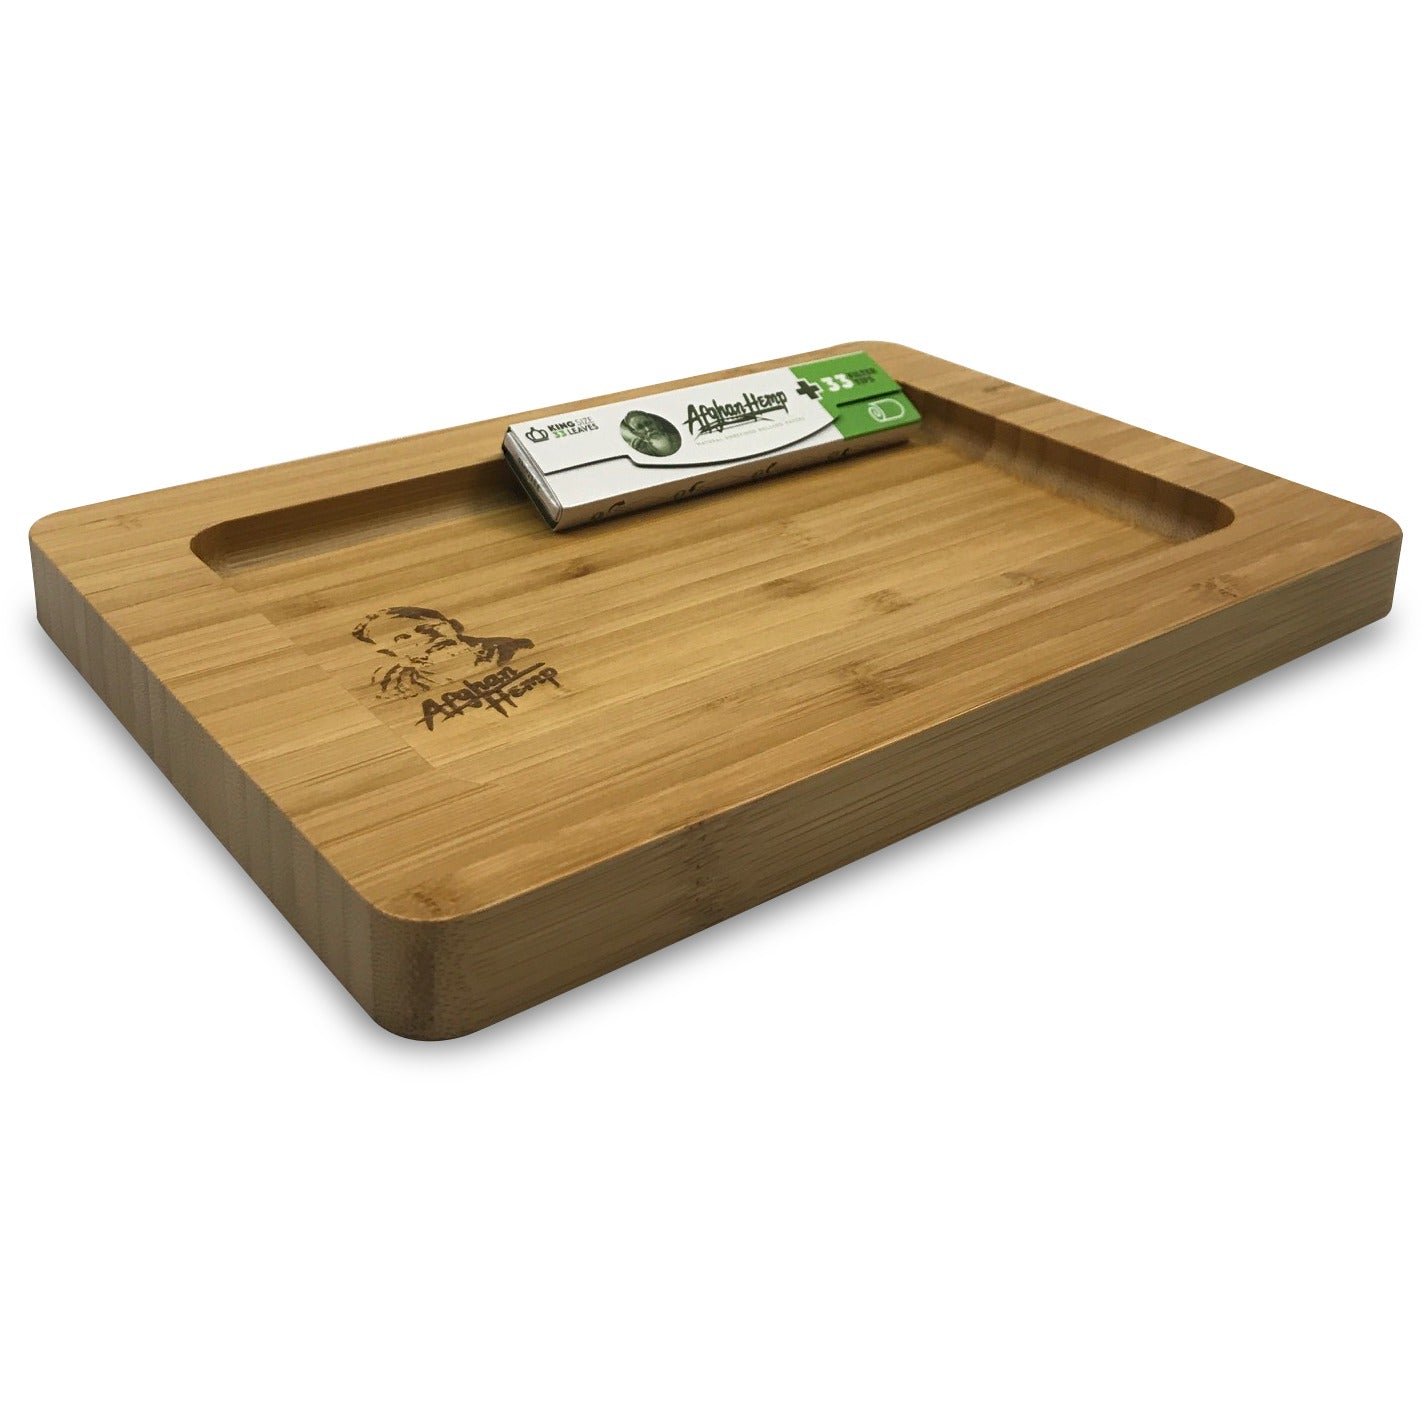 Never Lose A Crumb Of Bud With The Afghan Hemp Wooden Rolling Tray